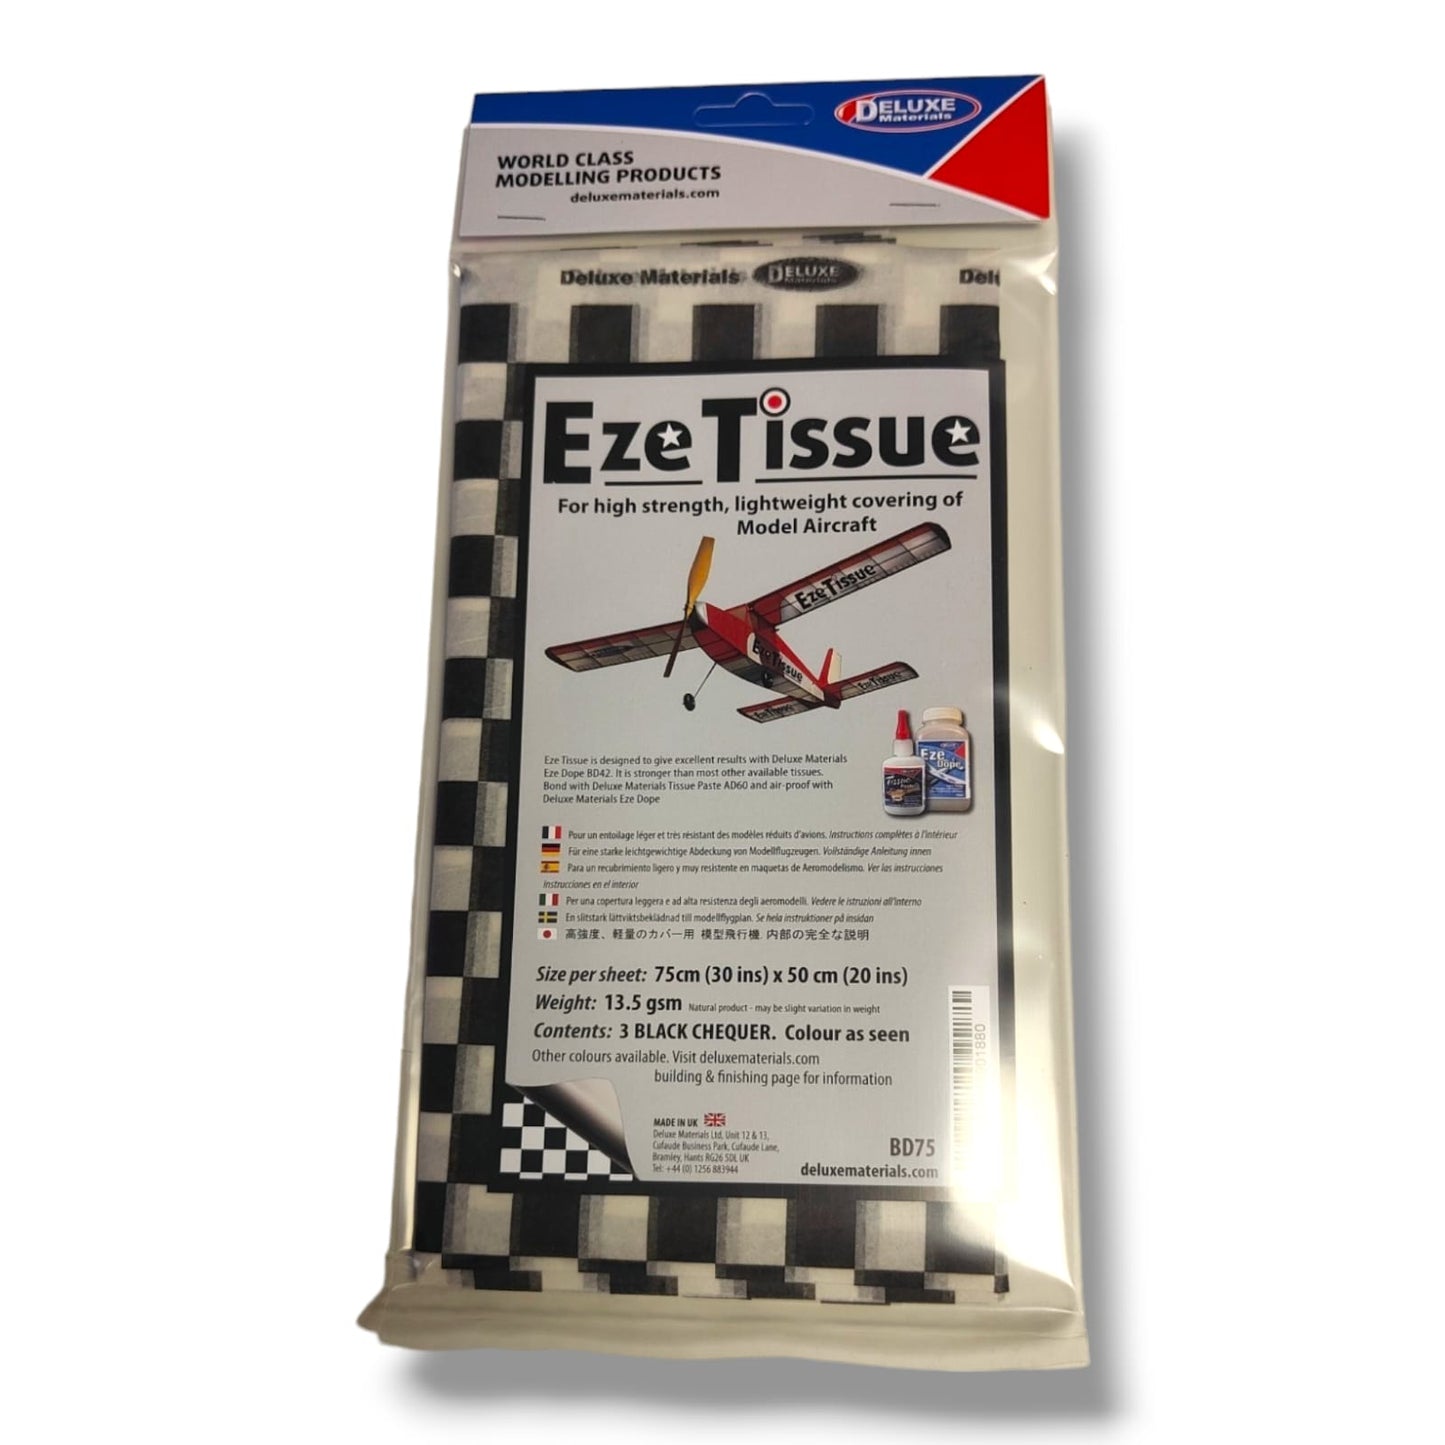 EZE Tissue, High strength Light weight covering for model aircraft